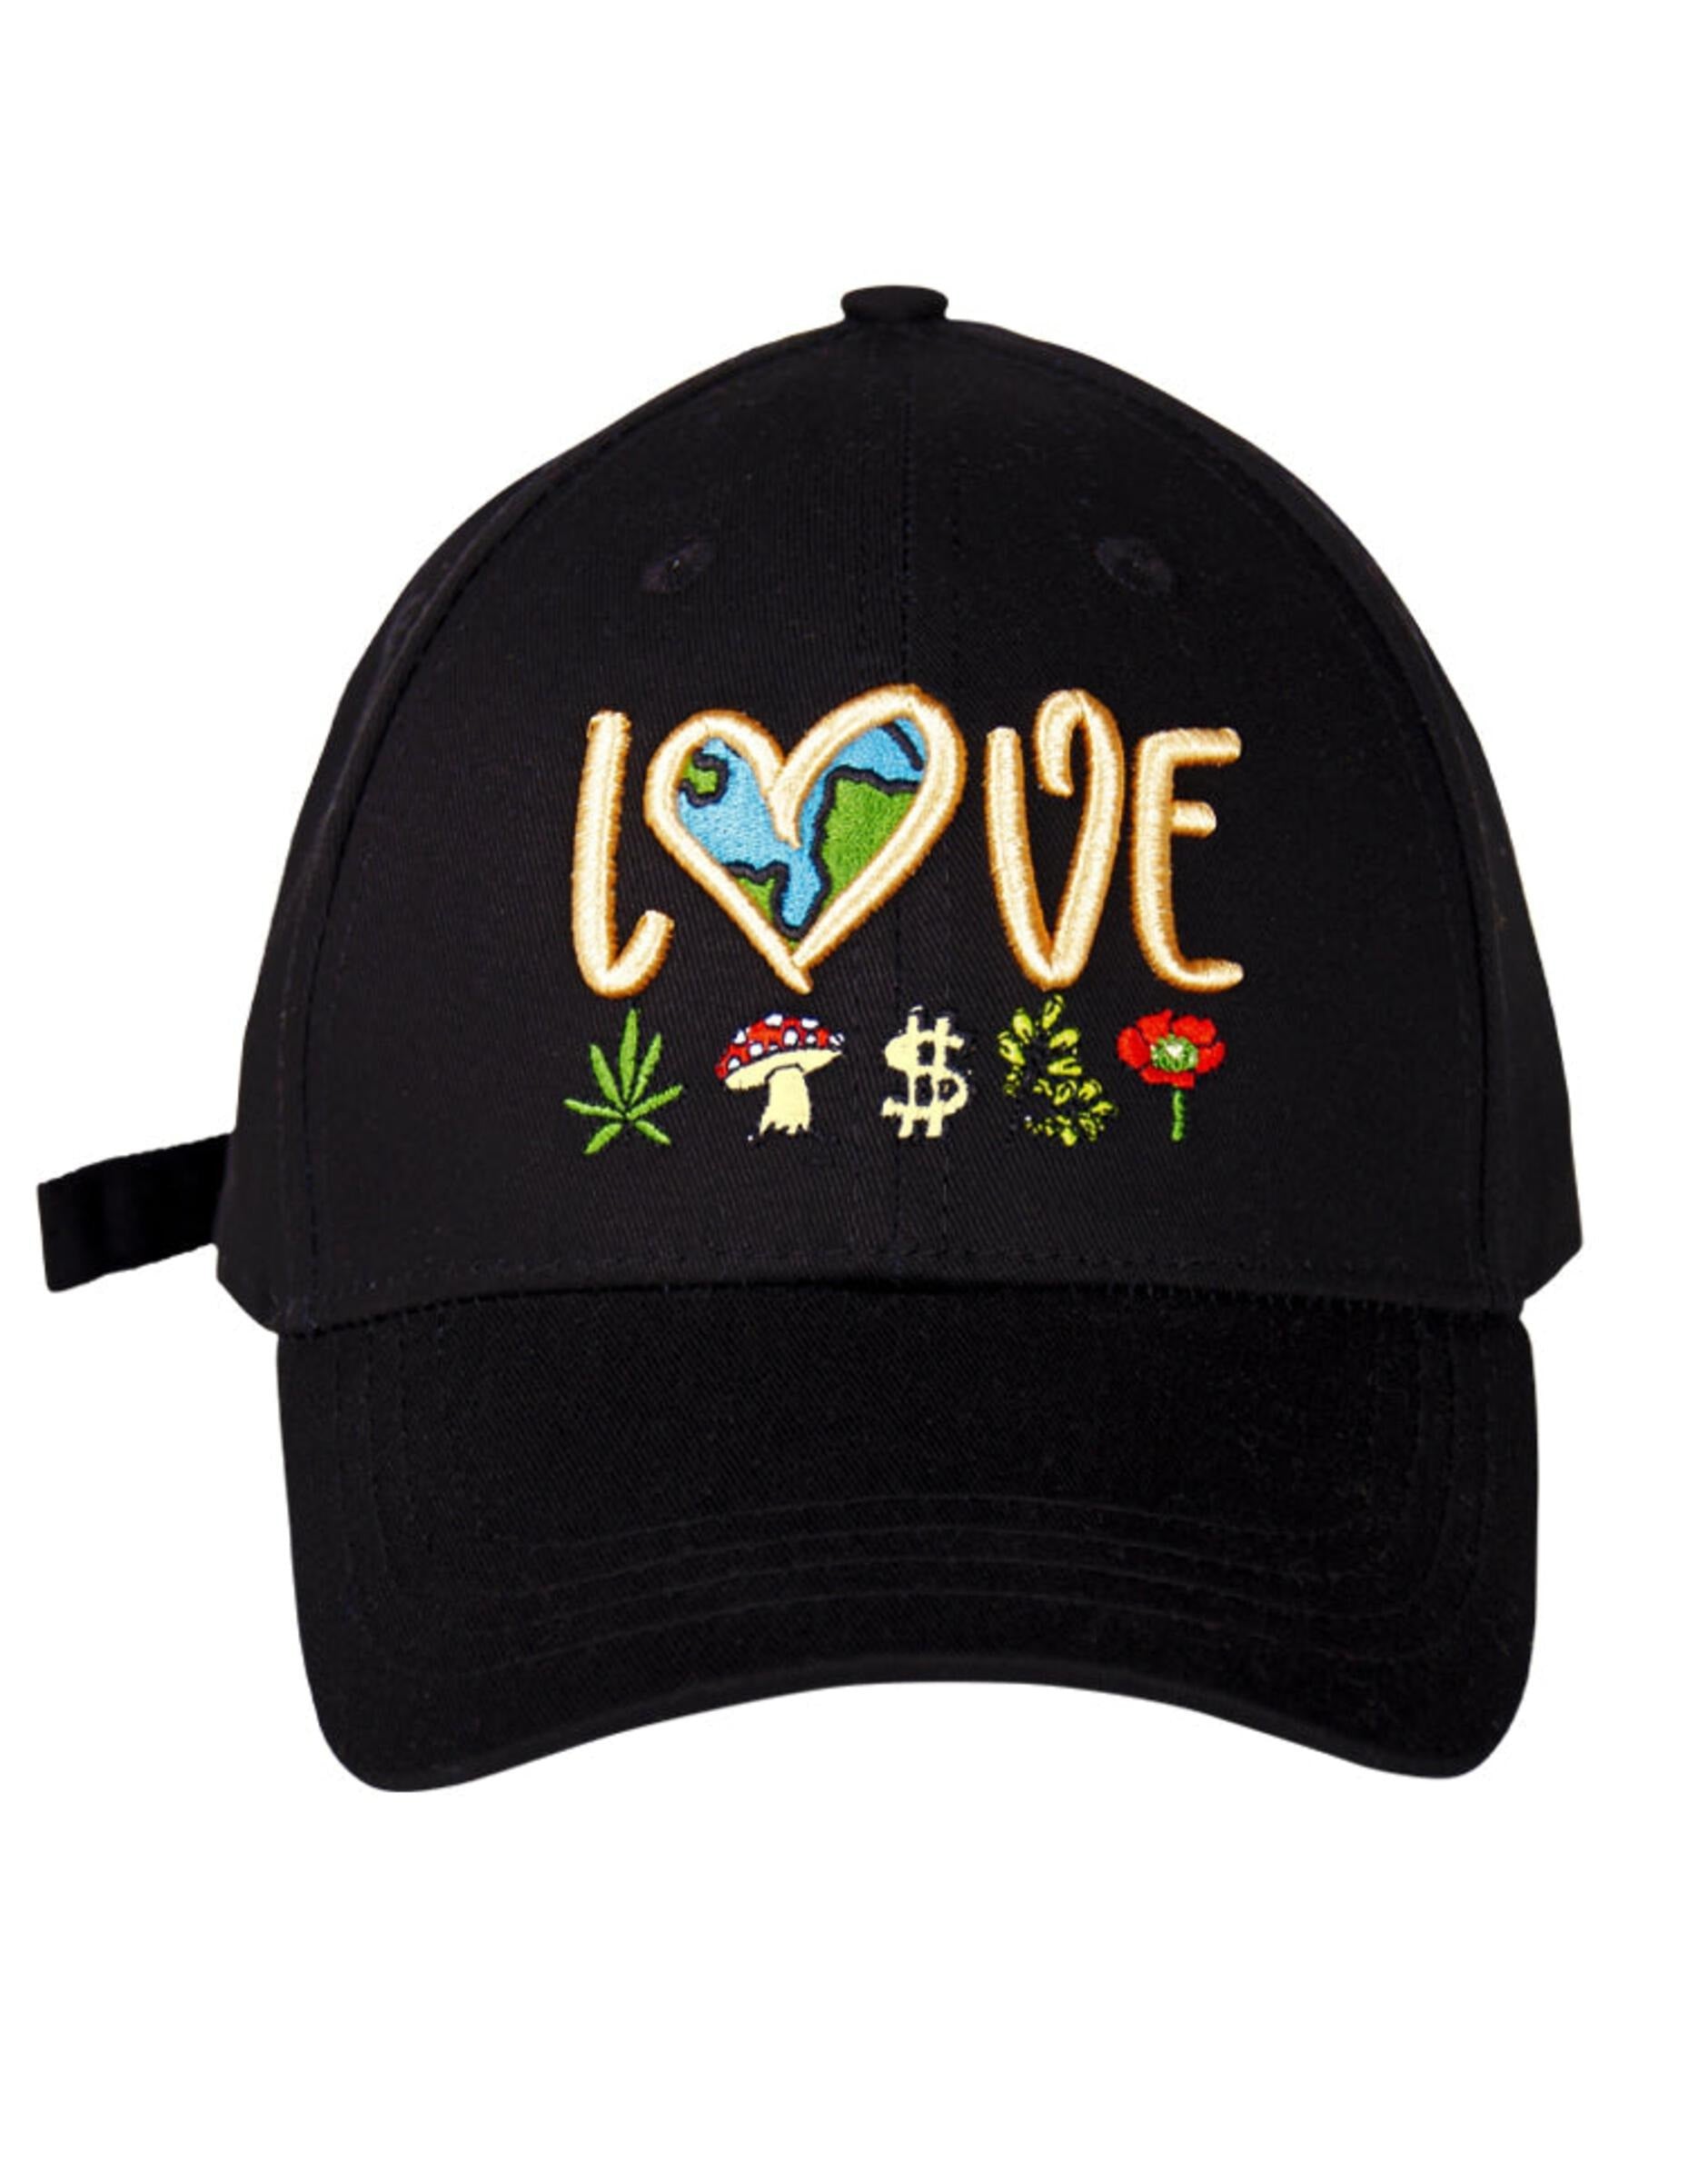 Hats, Black Hats, Dad Hat, Style, Snapback, Men, Boys, Teens, Gifts, Hat, Men, Boys, Teens, Gifts, Wmns, Girls, Urban, Style, Fashion, Tree Lovers Dad Hat, The Hideout Clothing, Love Hat, Gold,